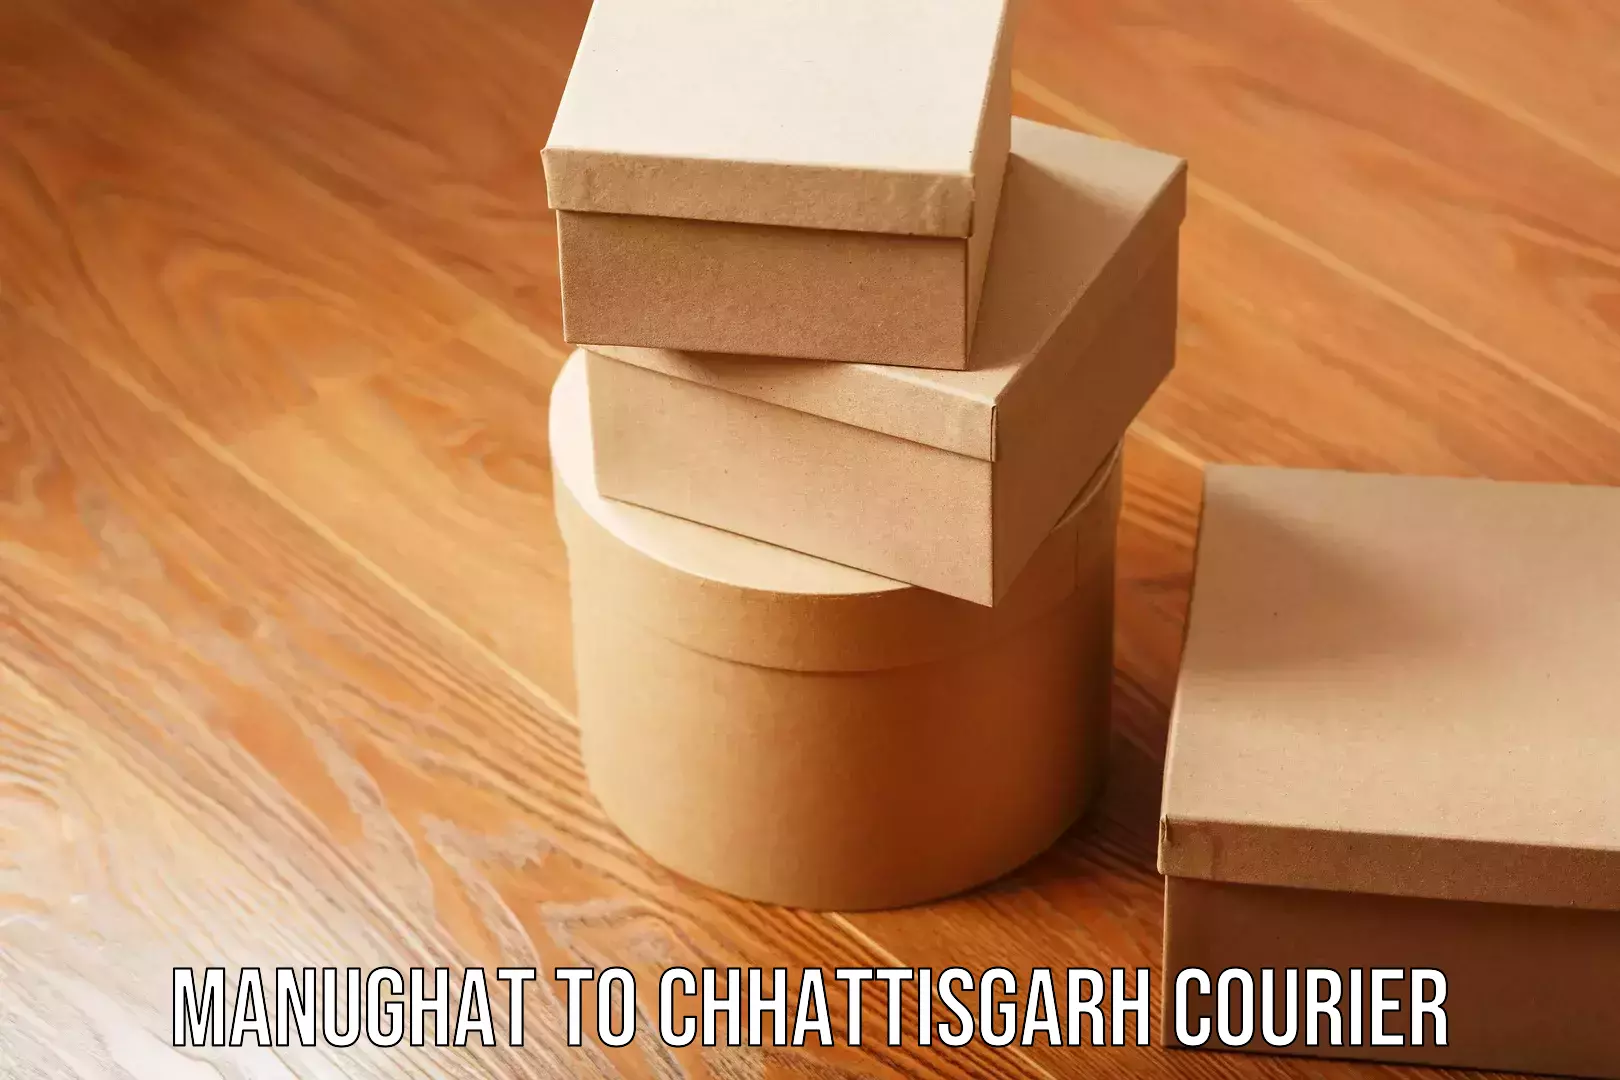 State-of-the-art courier technology Manughat to Chhattisgarh